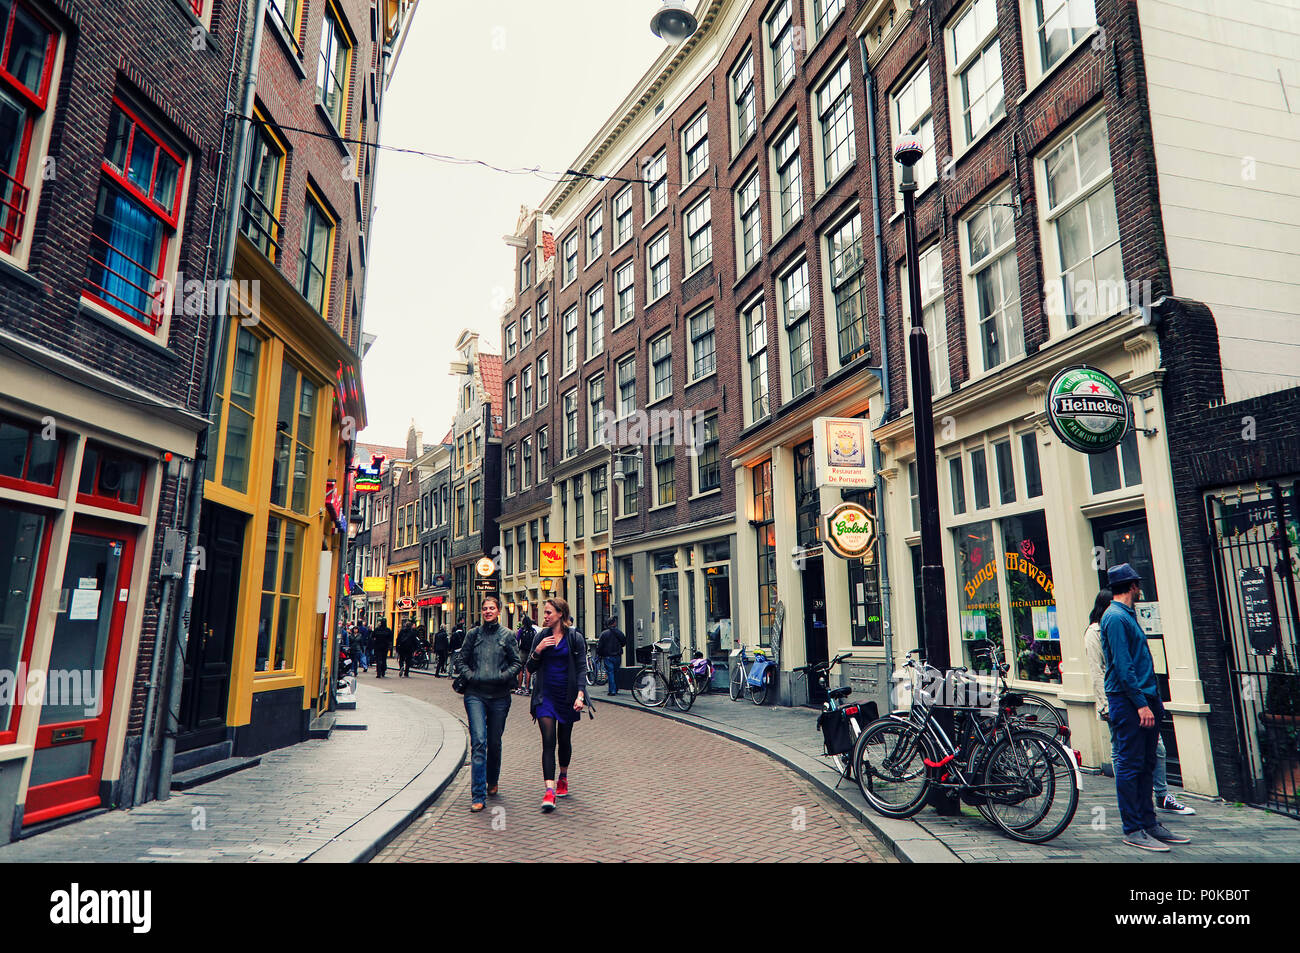 People walking at one of the streets in the old town of Amsterdam which has many coffee shops,bars and cafe's. Netherlands Stock Photo